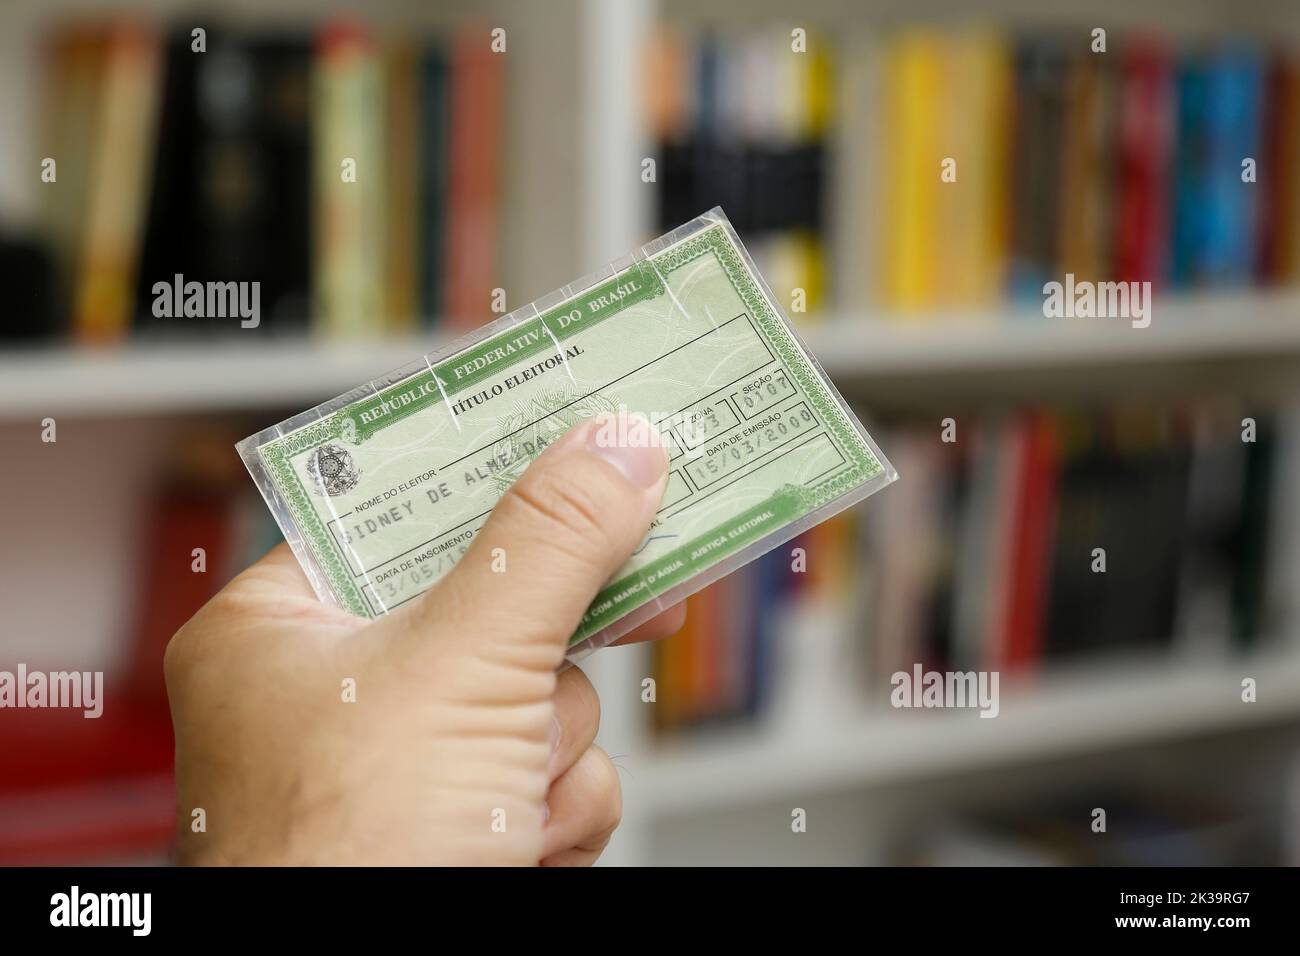 hand holding an electoral card, document used to vote in Brazil Stock Photo